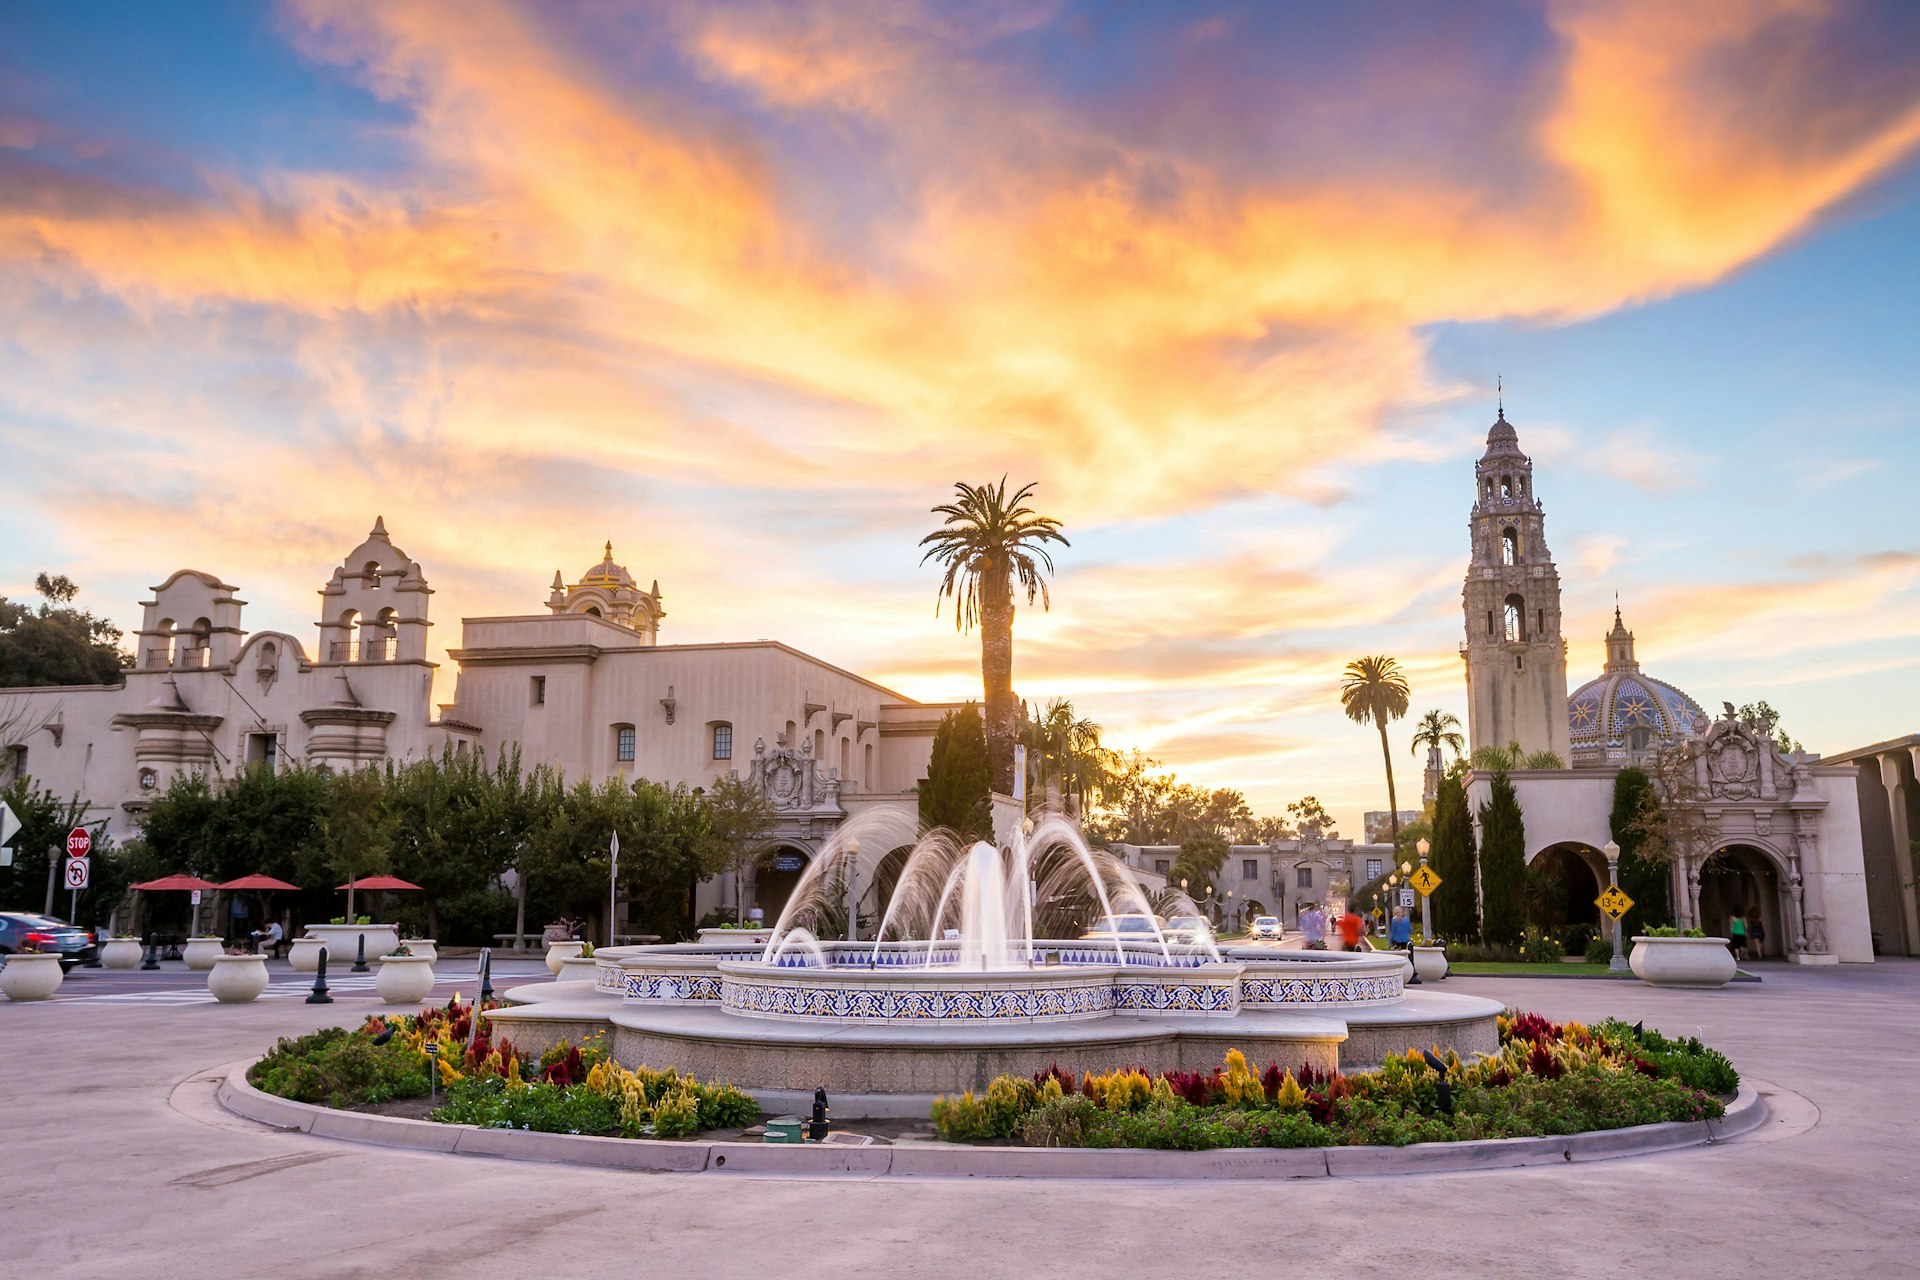 Balboa Park is one of San Diego's most accessible parks